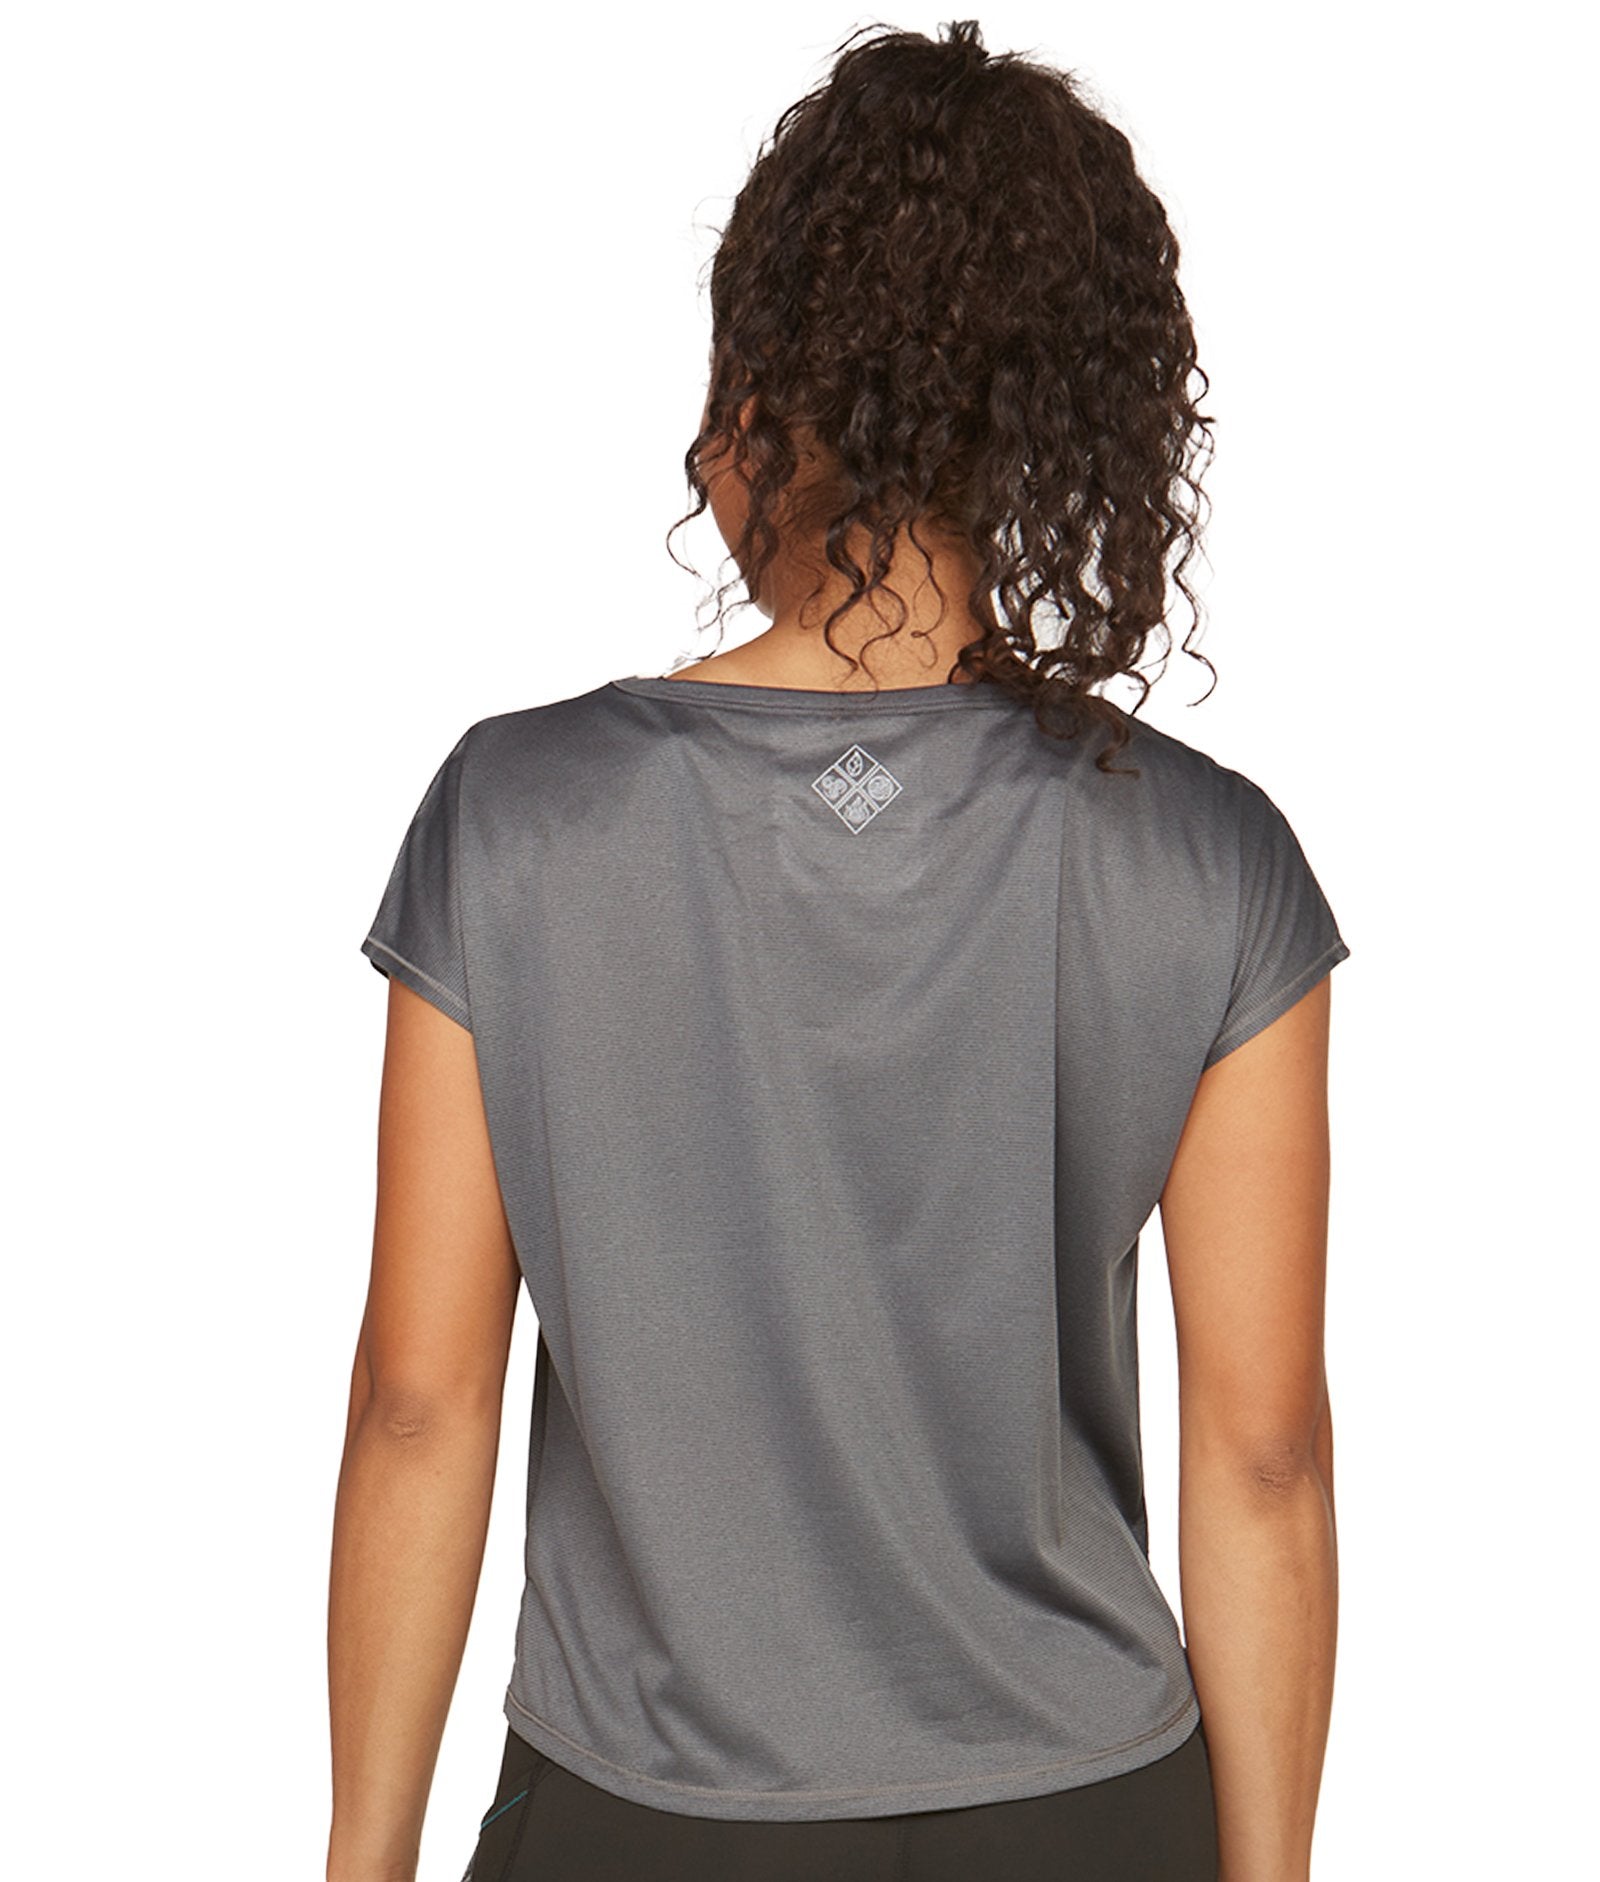 Women's Black Afloat Recycled Tee